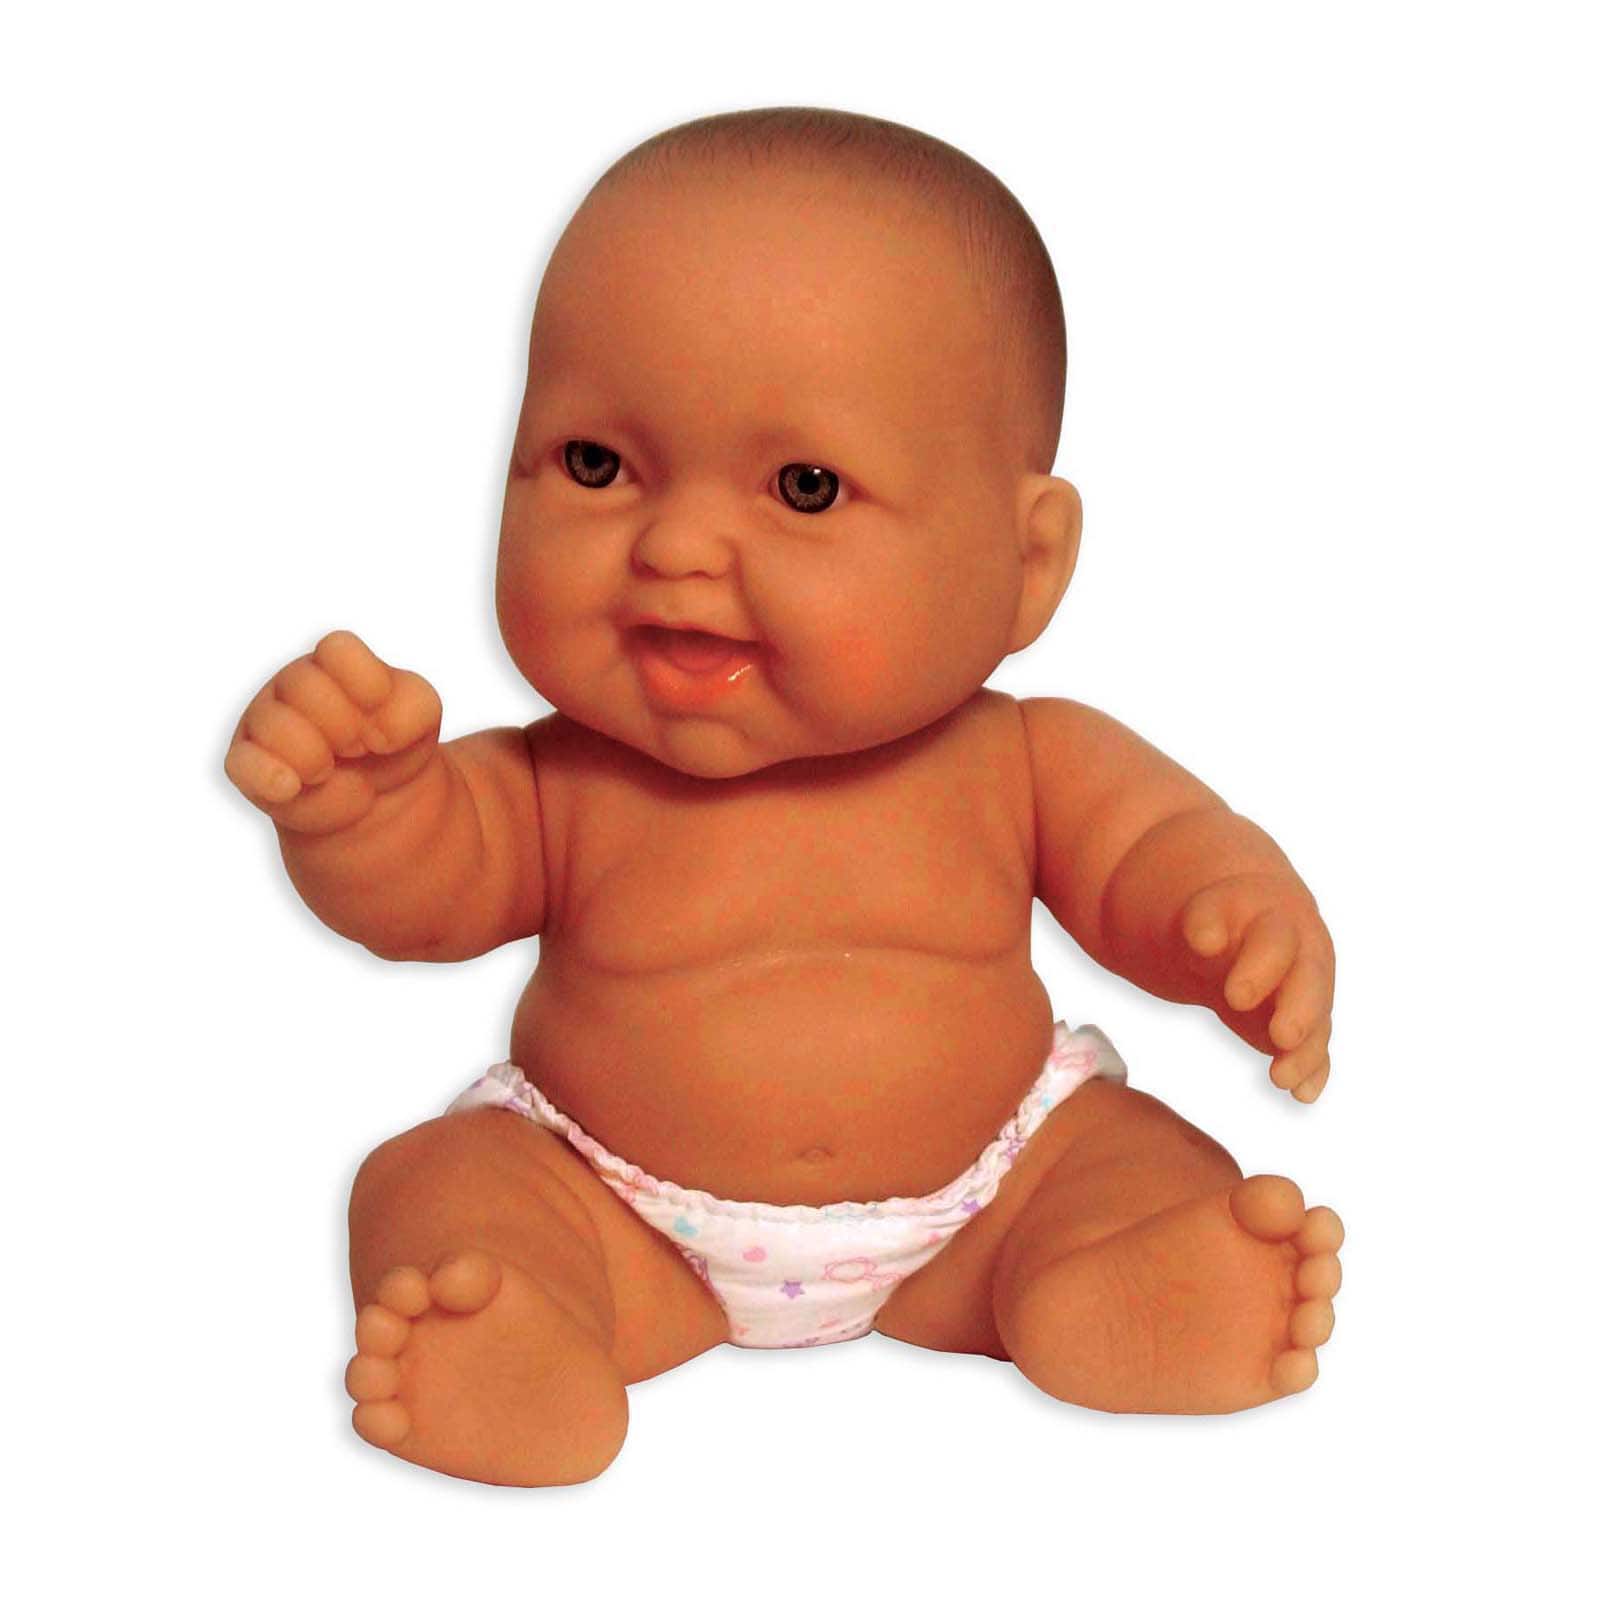 dolls for babies